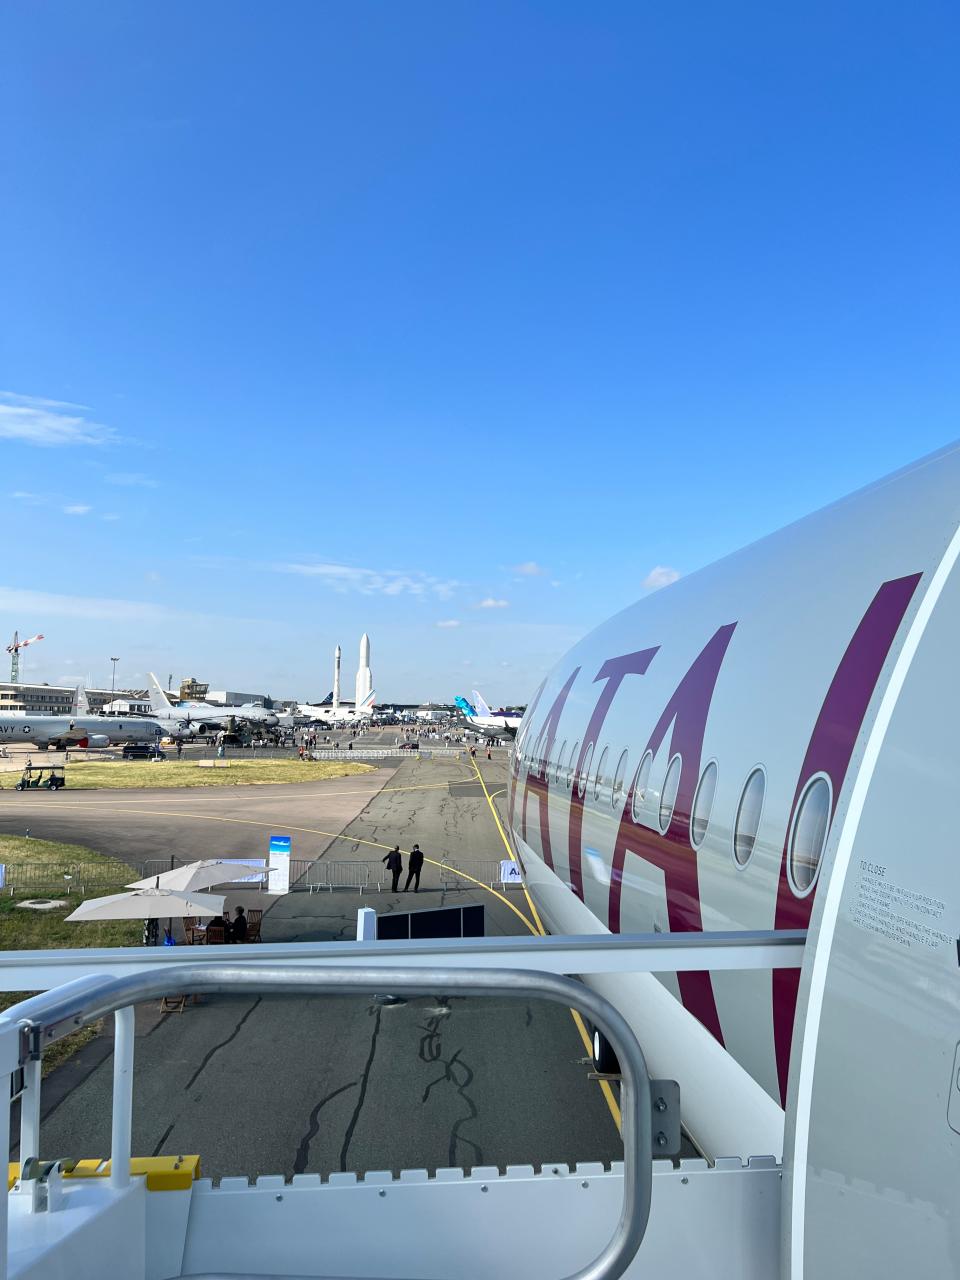 The Qatar Airways logo on the side of an A350, and the Paris Air Show visible in the background — including military planes, and two rockets